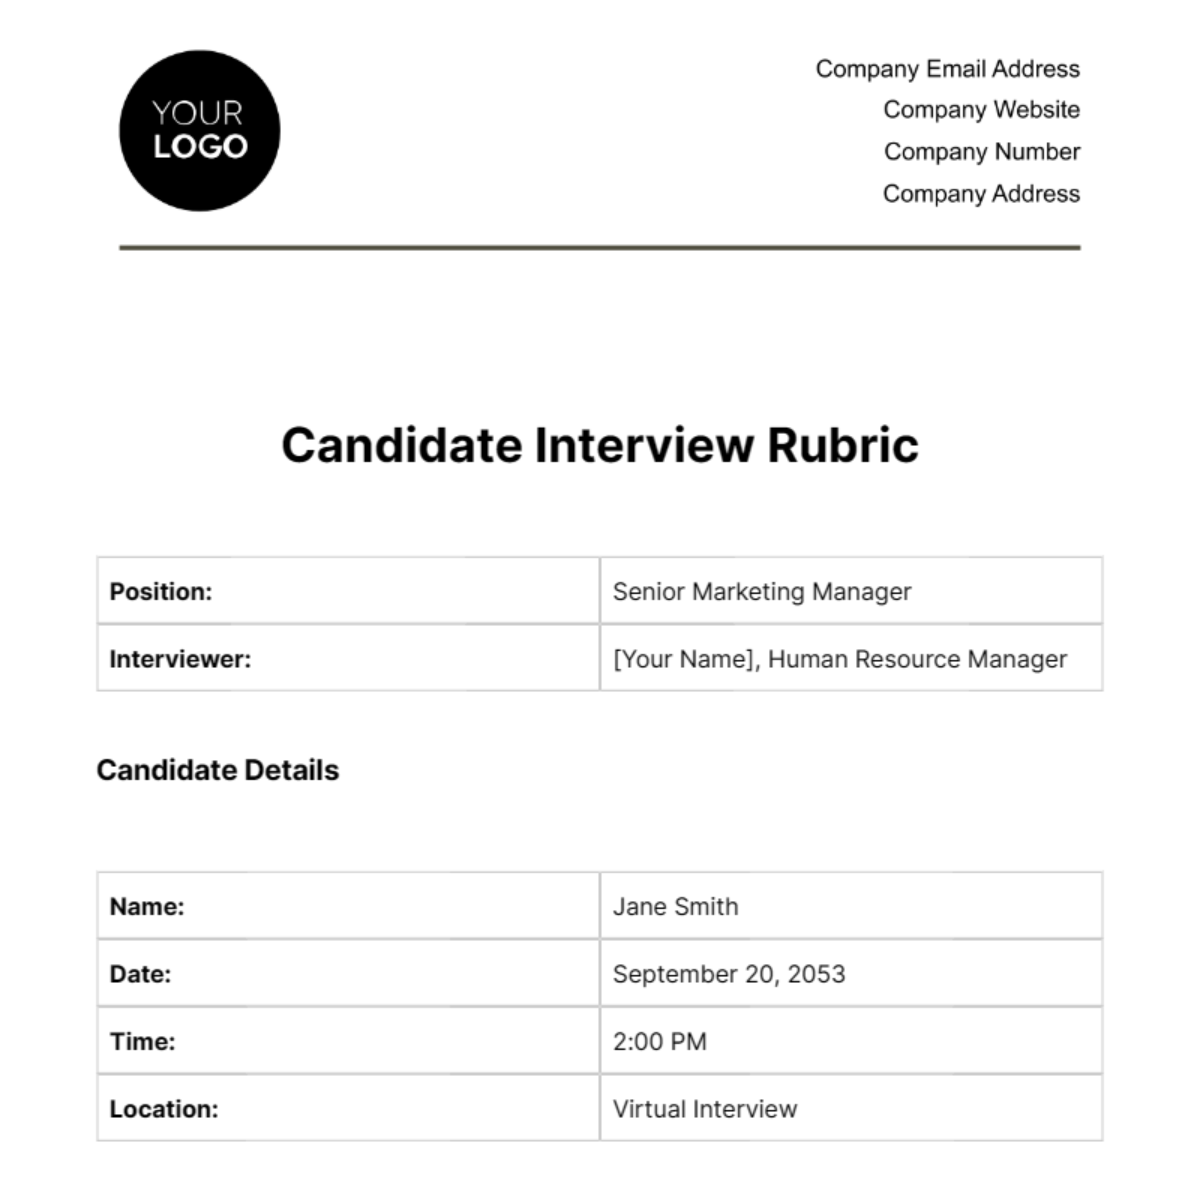 Candidate Interview Rubric HR Template